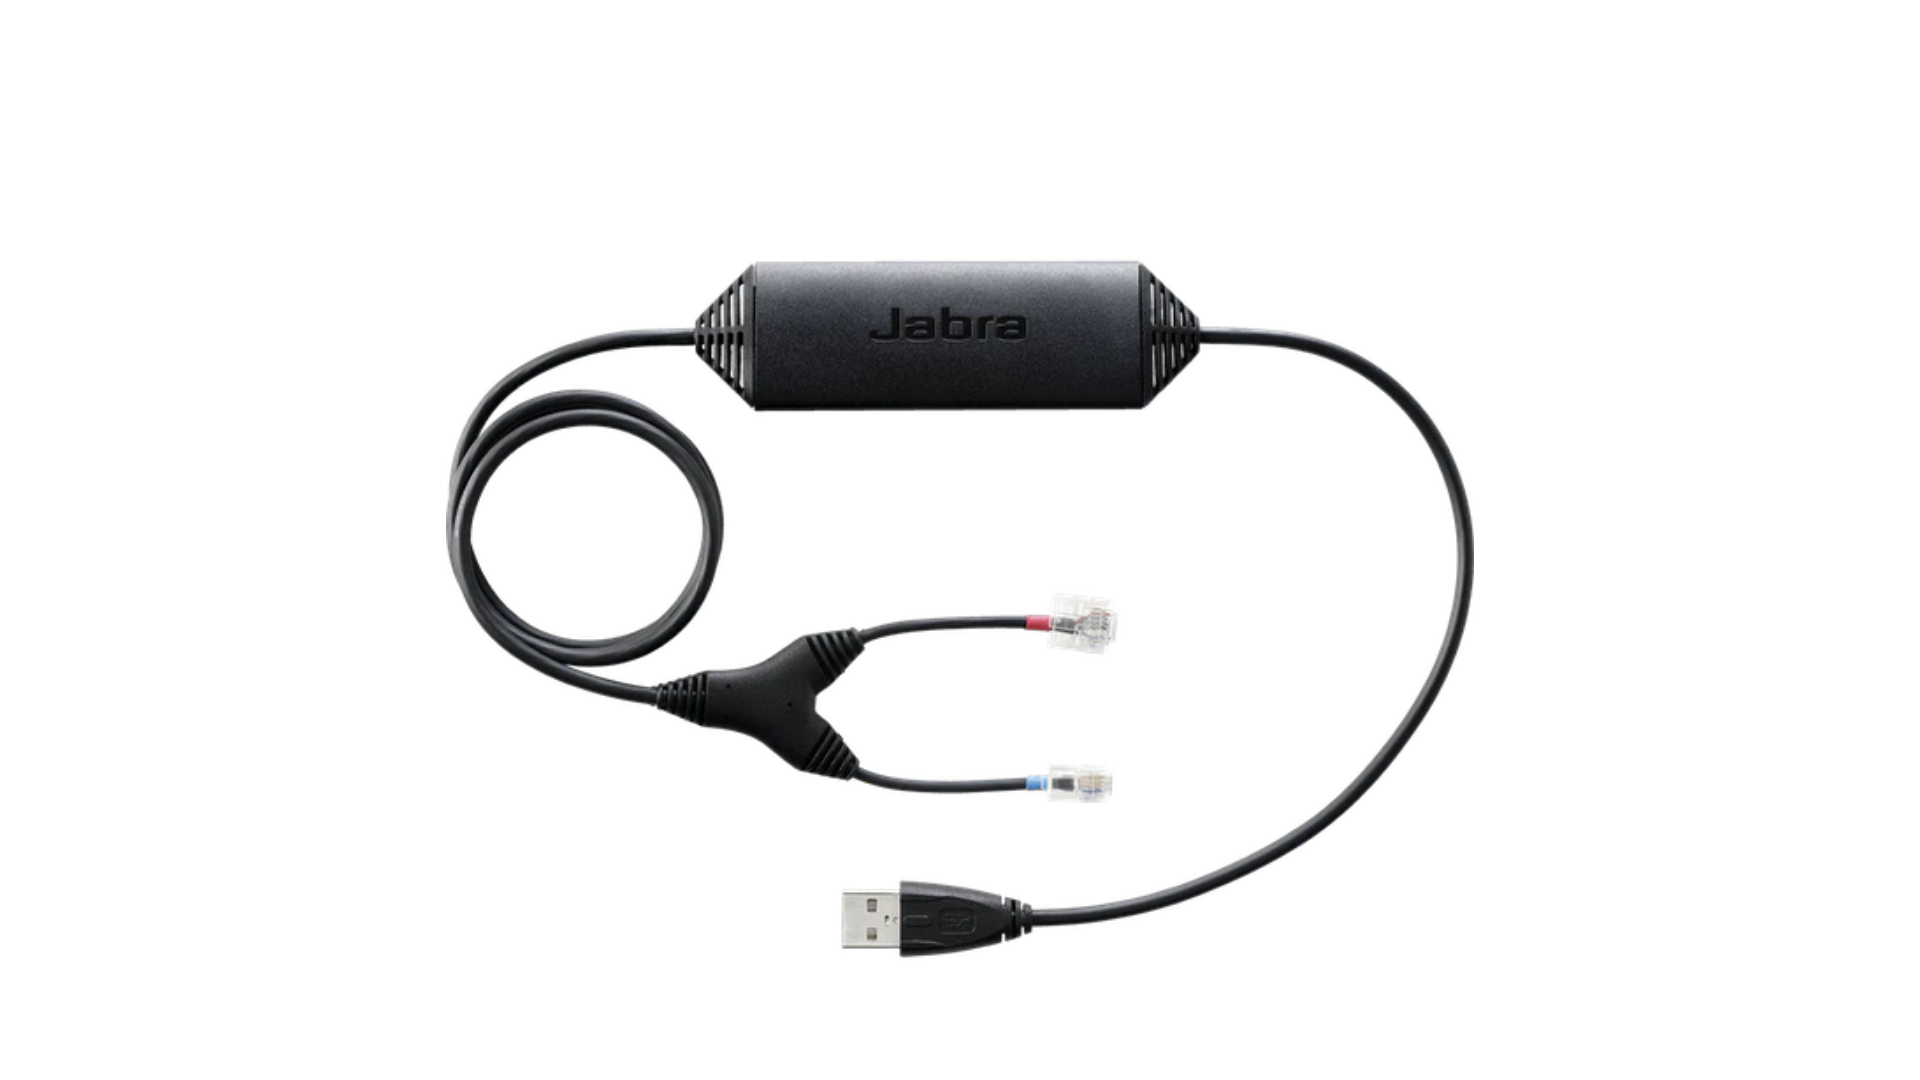 CISCO IP EHS Adapter, USB to (AUX/RJ-9) for Jabra GN9300e Series, PRO 9400 Series, GO 6470 Wireless Headsets, and Cisco 8900/9900 Series IP phones supporting USB audio termination.